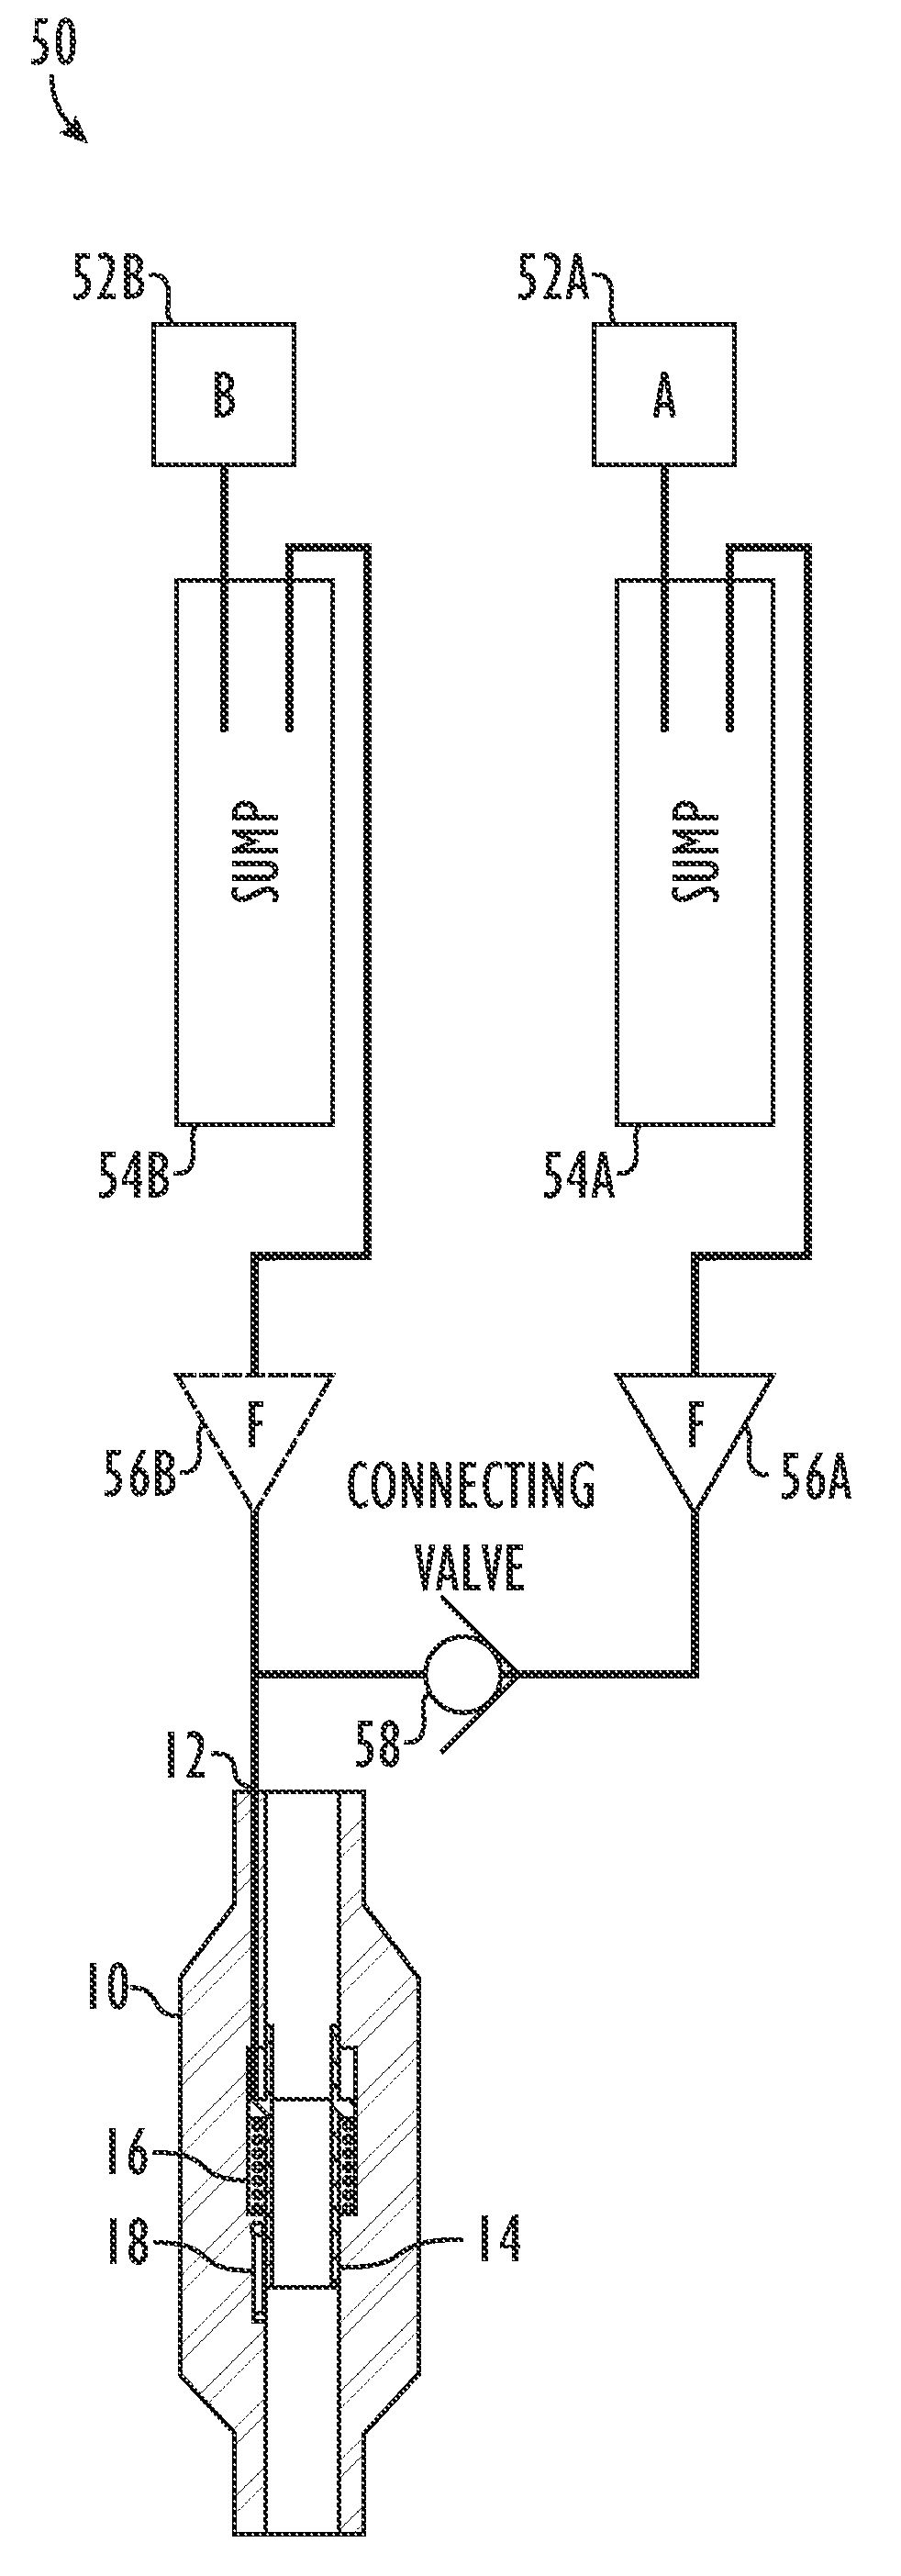 Dual control line system and method for operating surface controlled sub-surface safety valve in a well